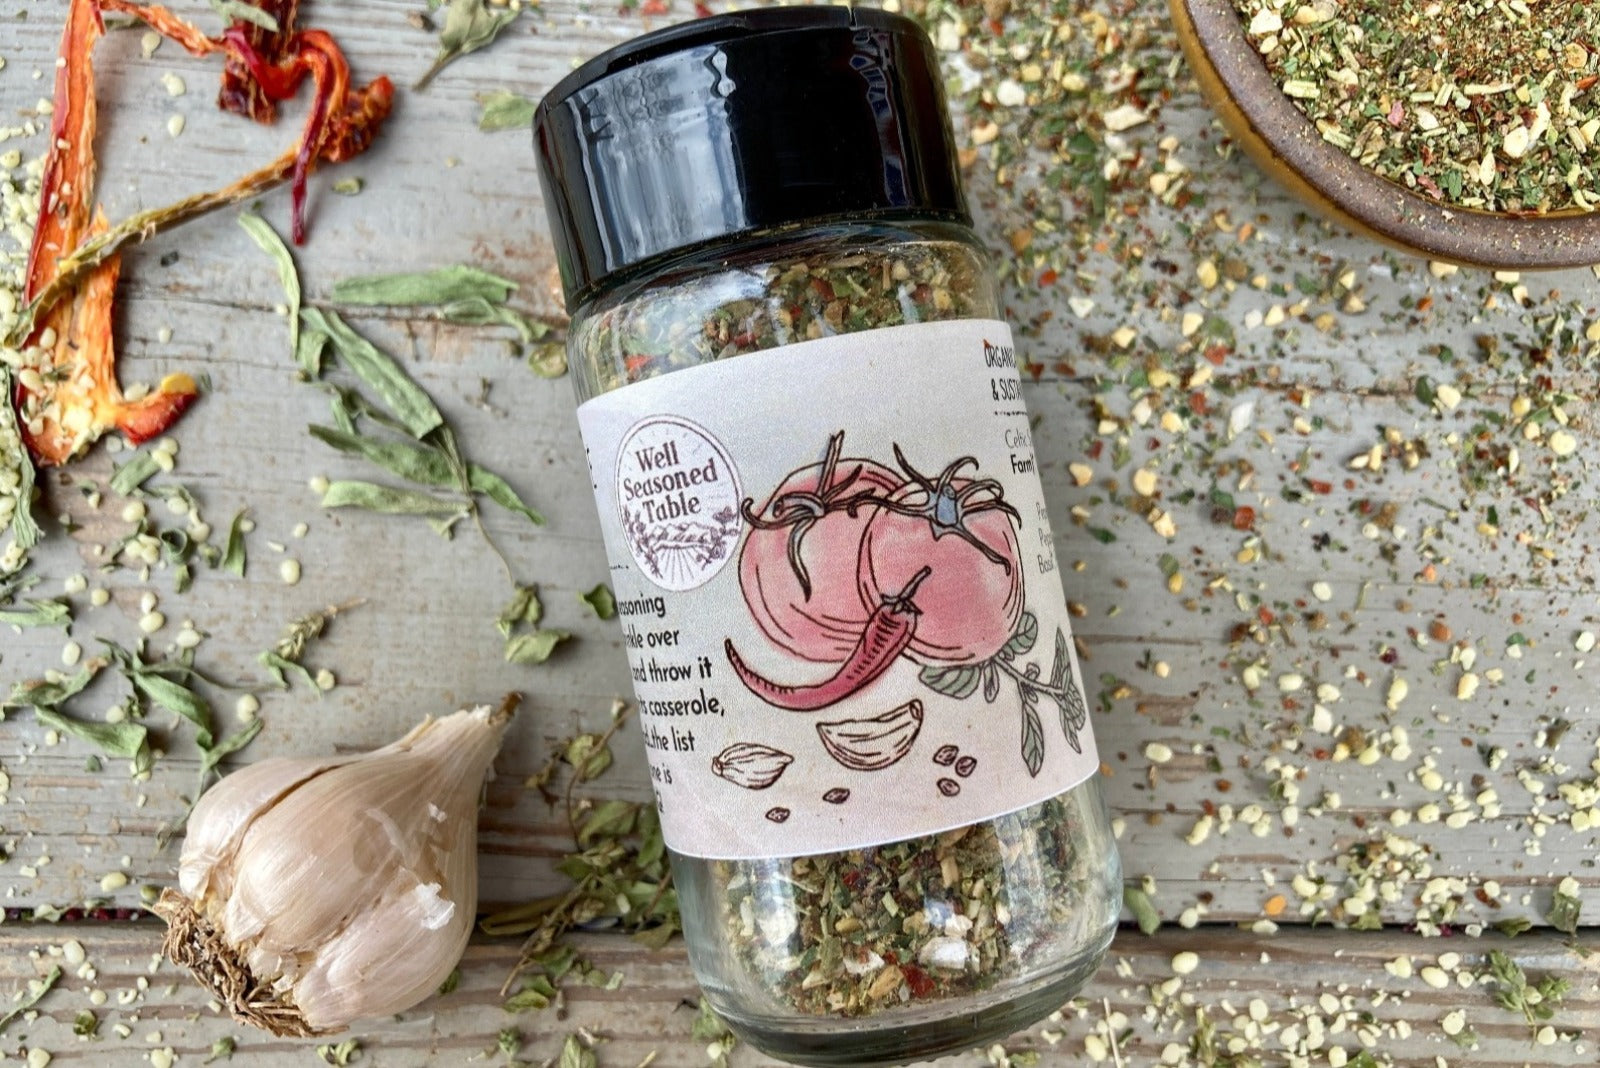 The side of a glass shaker jar of Spice of Life (everything) Seasoning from Well Seasoned Table on a wooden background with a bowl of seasoning, dried peppers, garlic, and herbs.